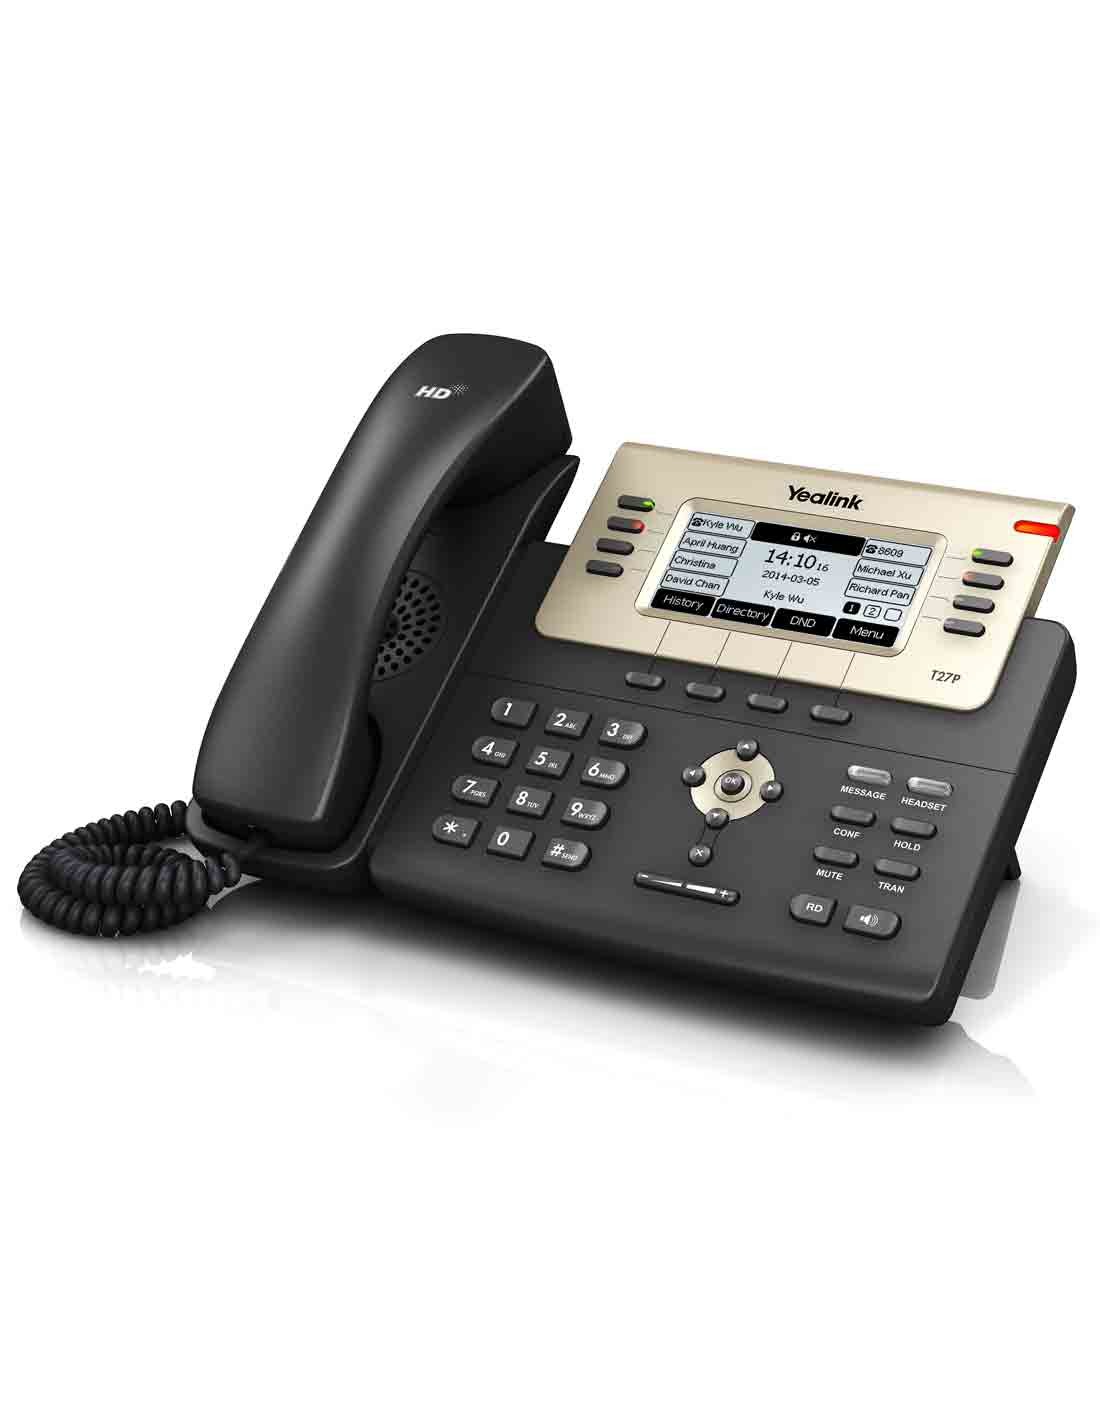 Yealink SIP-T27P IP Phone at a Cheap Price in Dubai Online Store